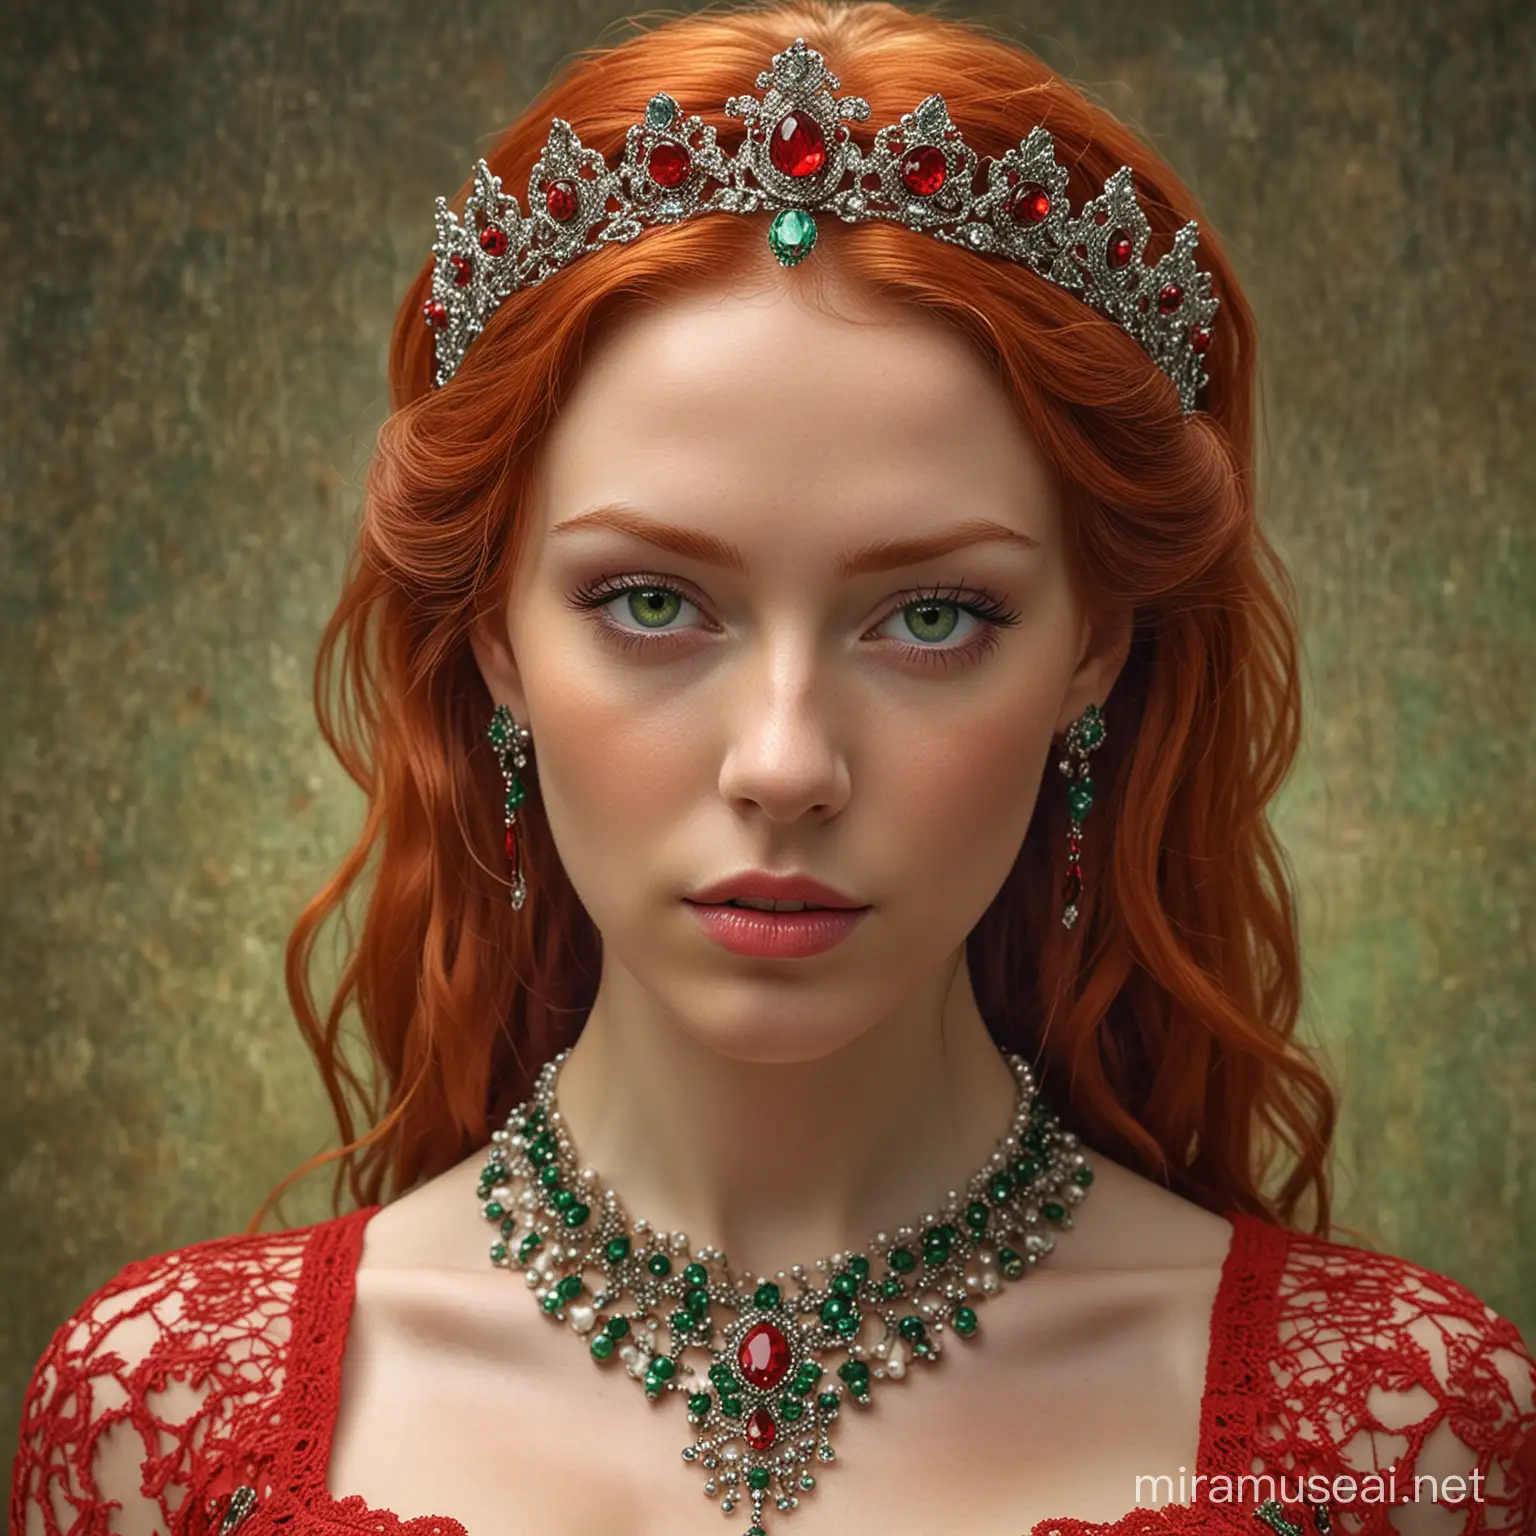 Stunning Redhead Woman with Jeweled Crown and Porcelain Skin